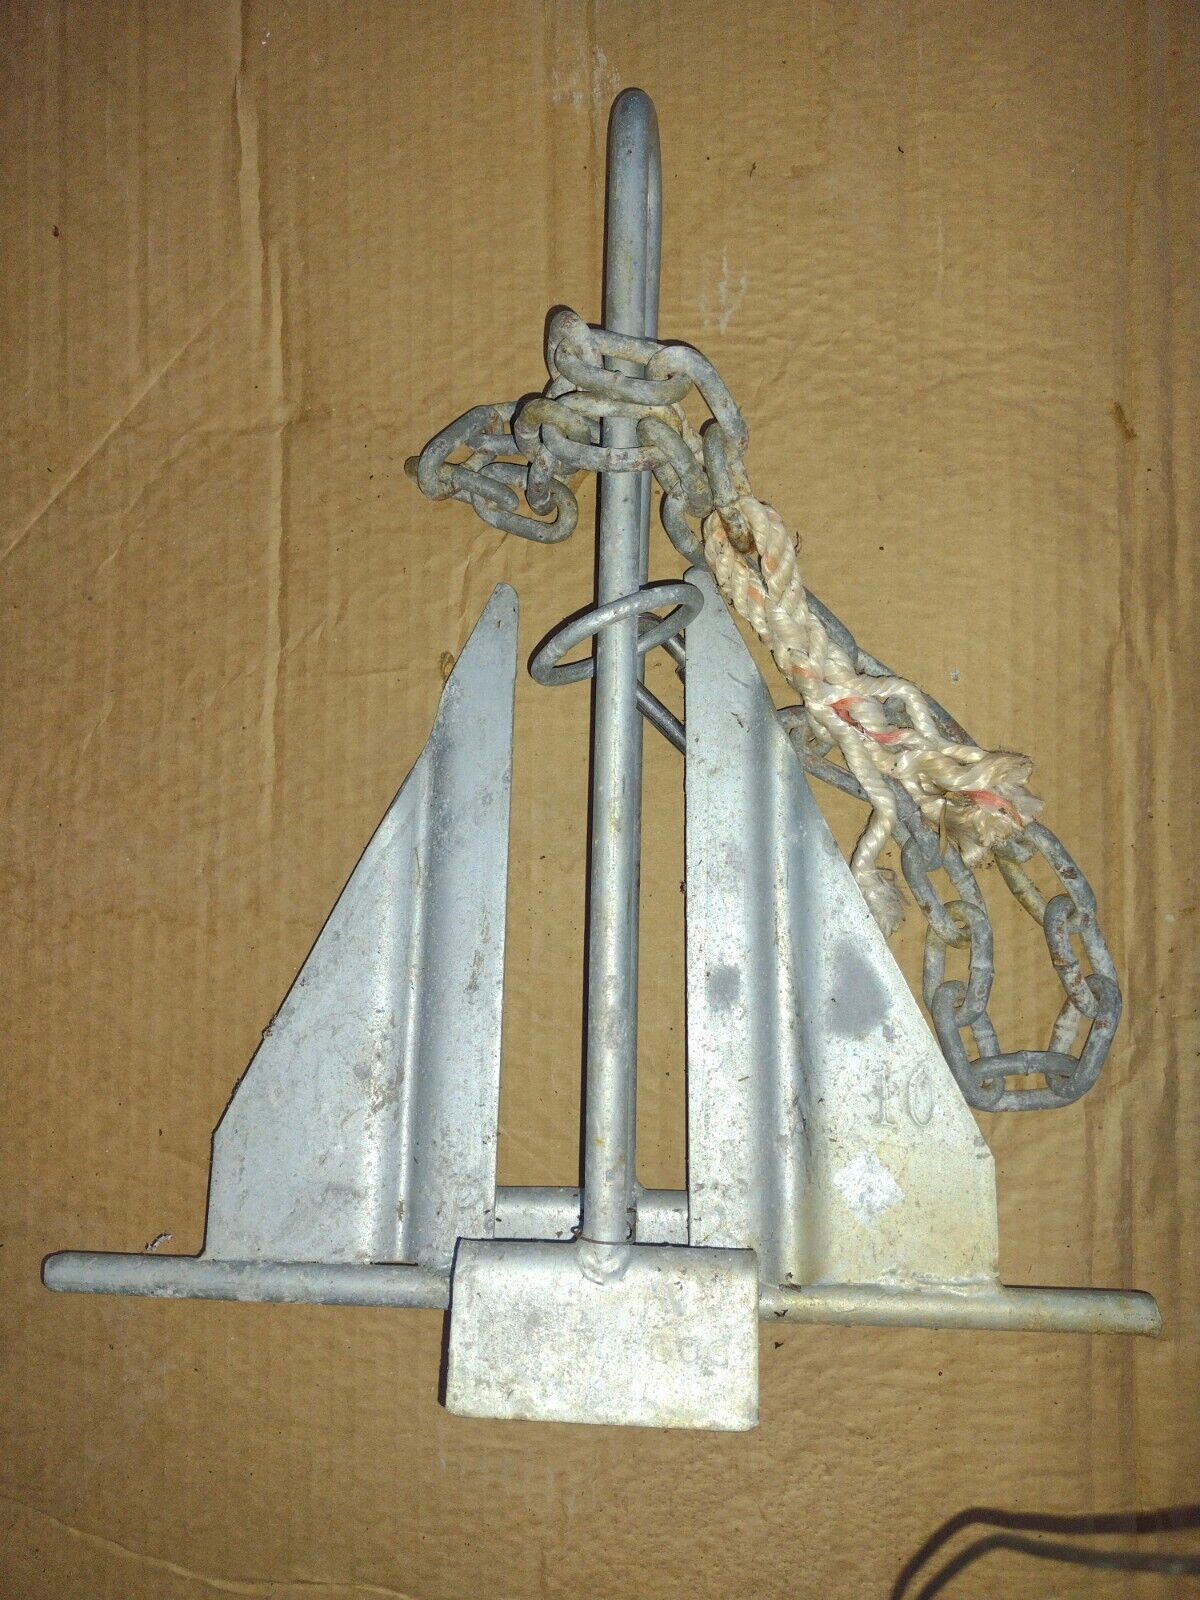 10 Lb Galvanized Boat Anchor For Boats 19-24 Ft